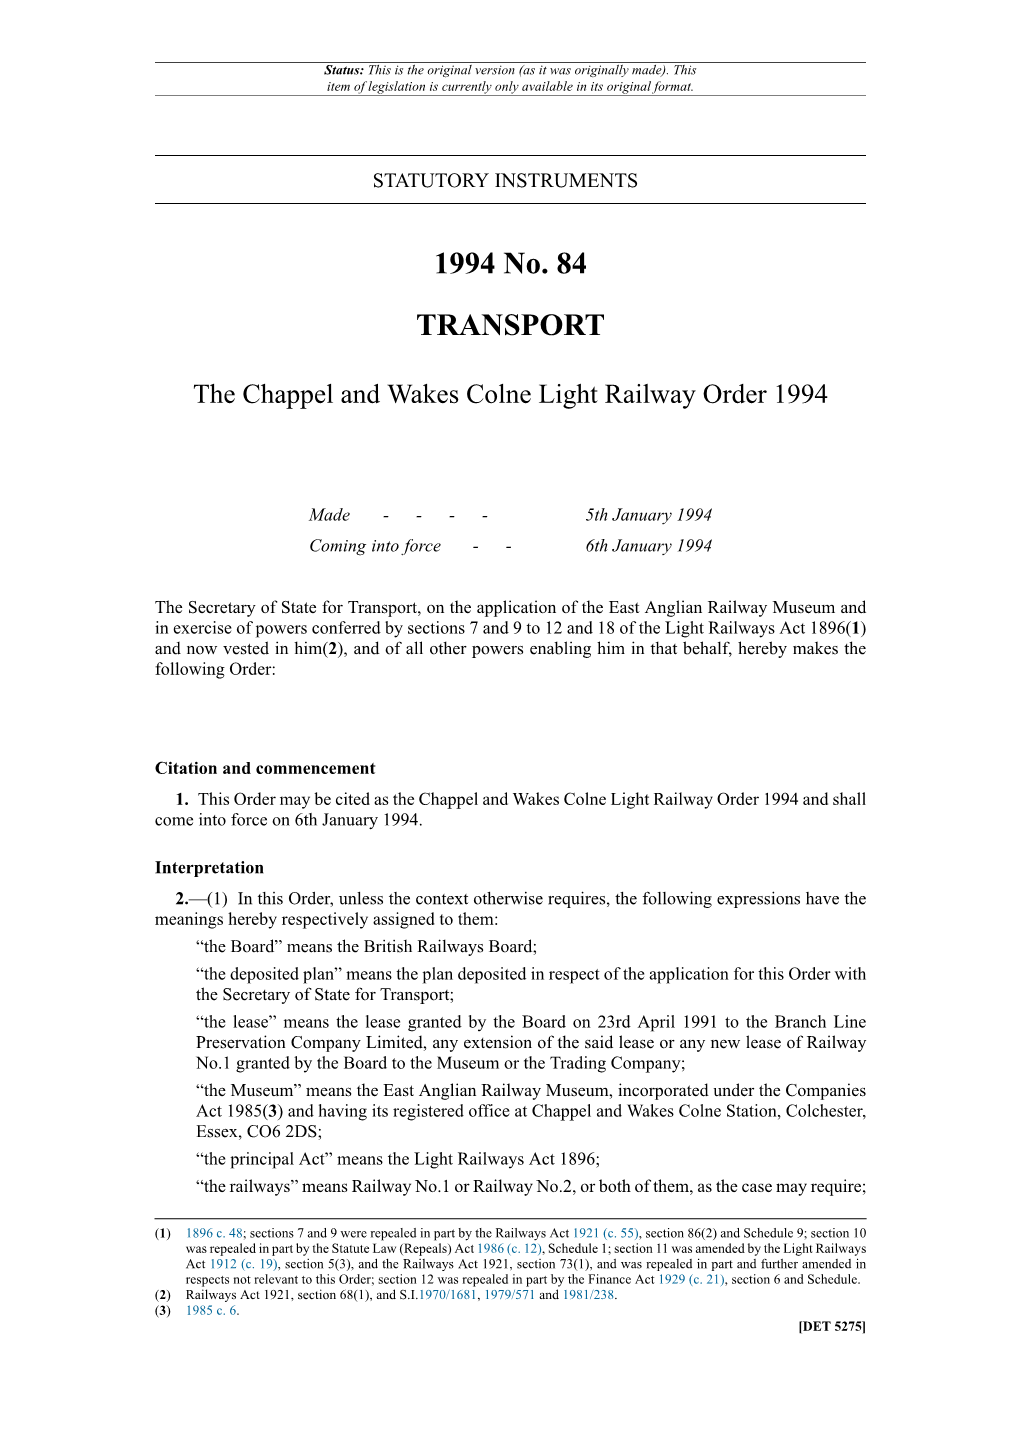 The Chappel and Wakes Colne Light Railway Order 1994